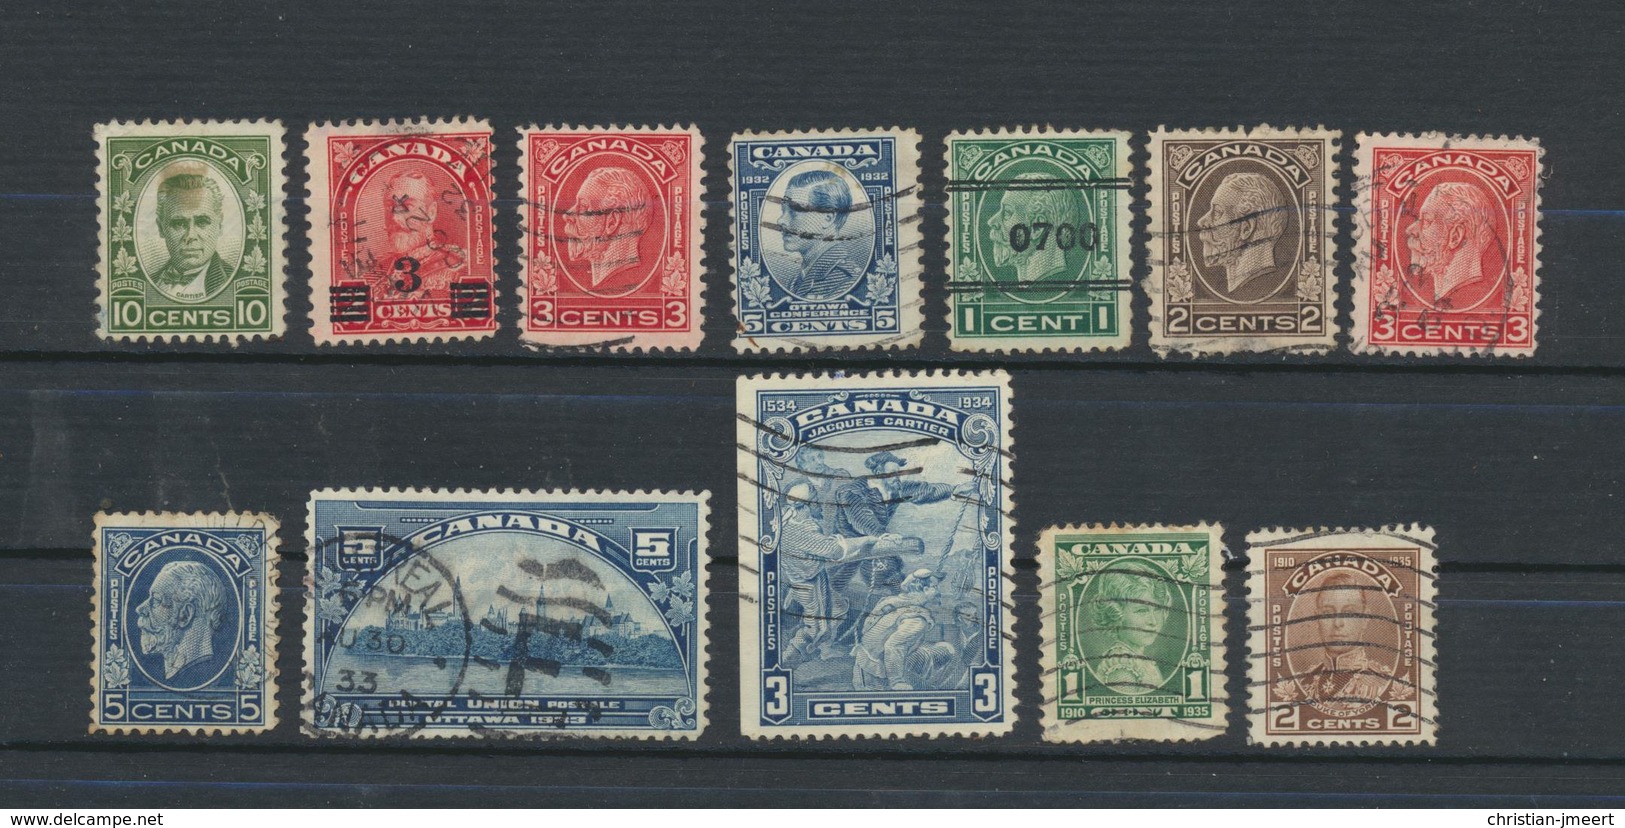 collection CANADA - Early to 1940 - High-Value - not thinned - not damaged - 108 v.- free registred mail